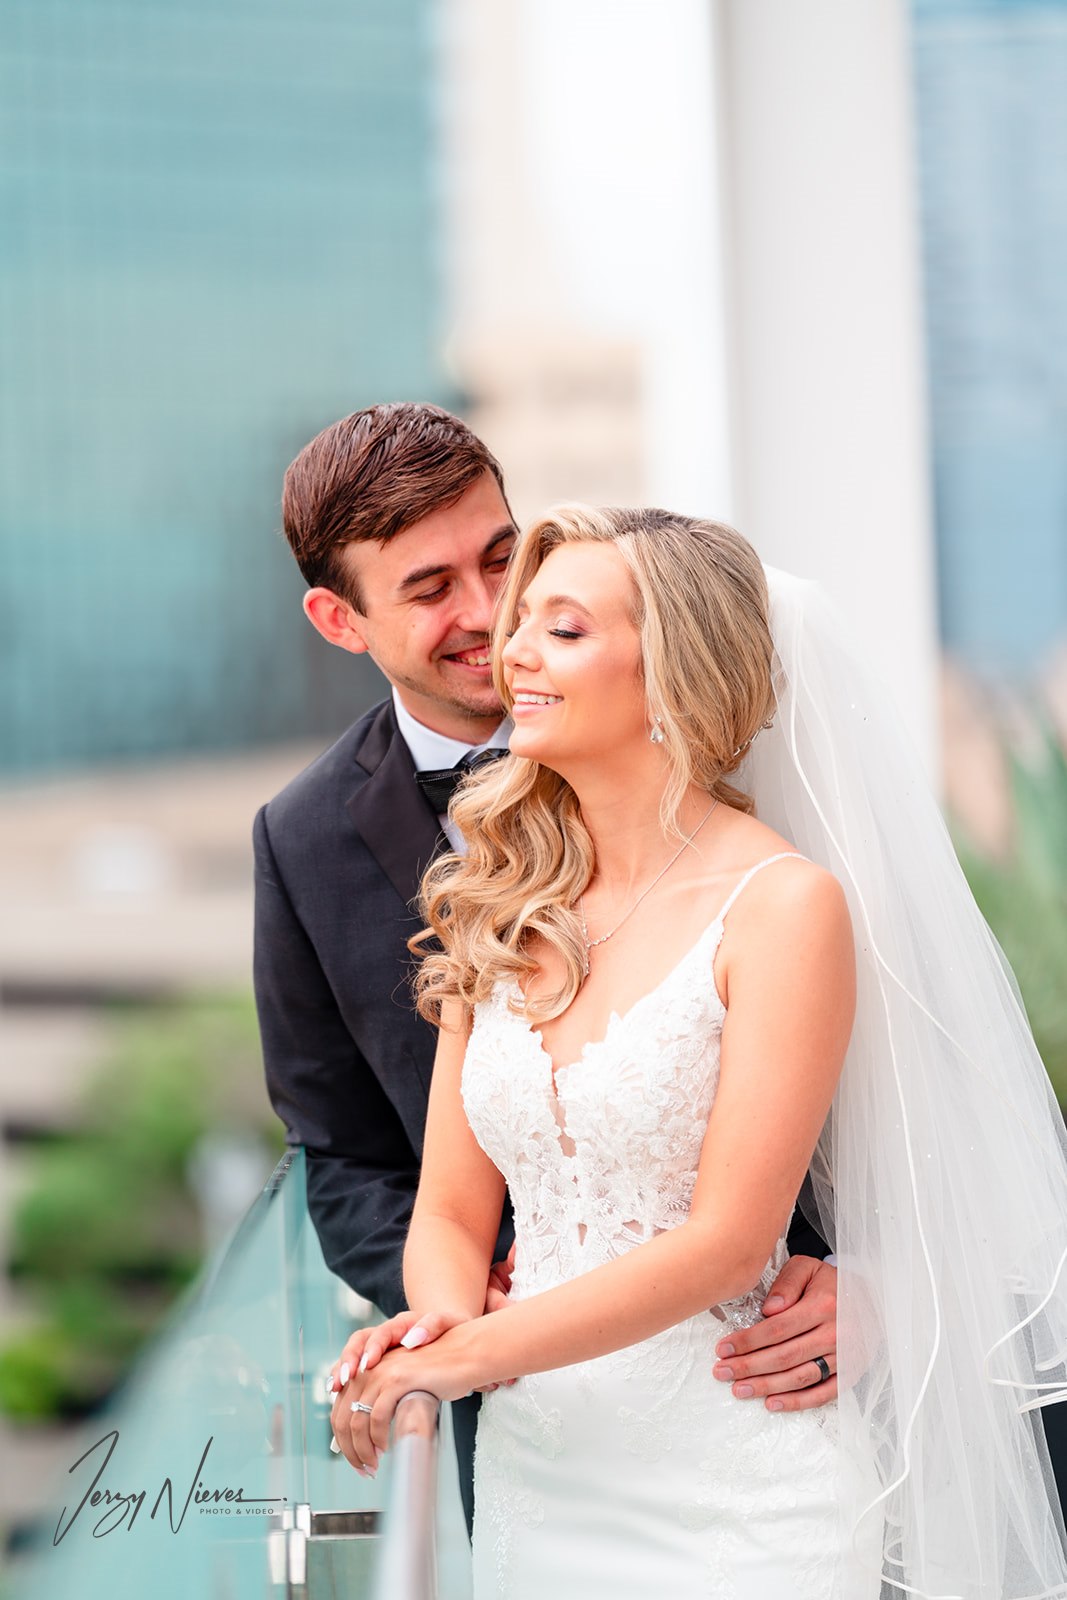 Close-up of newlyweds Brittany and Nathan embracing on the balcony of the Dr. Phillips Center for Performing Arts, focusing on their smiles and joy.